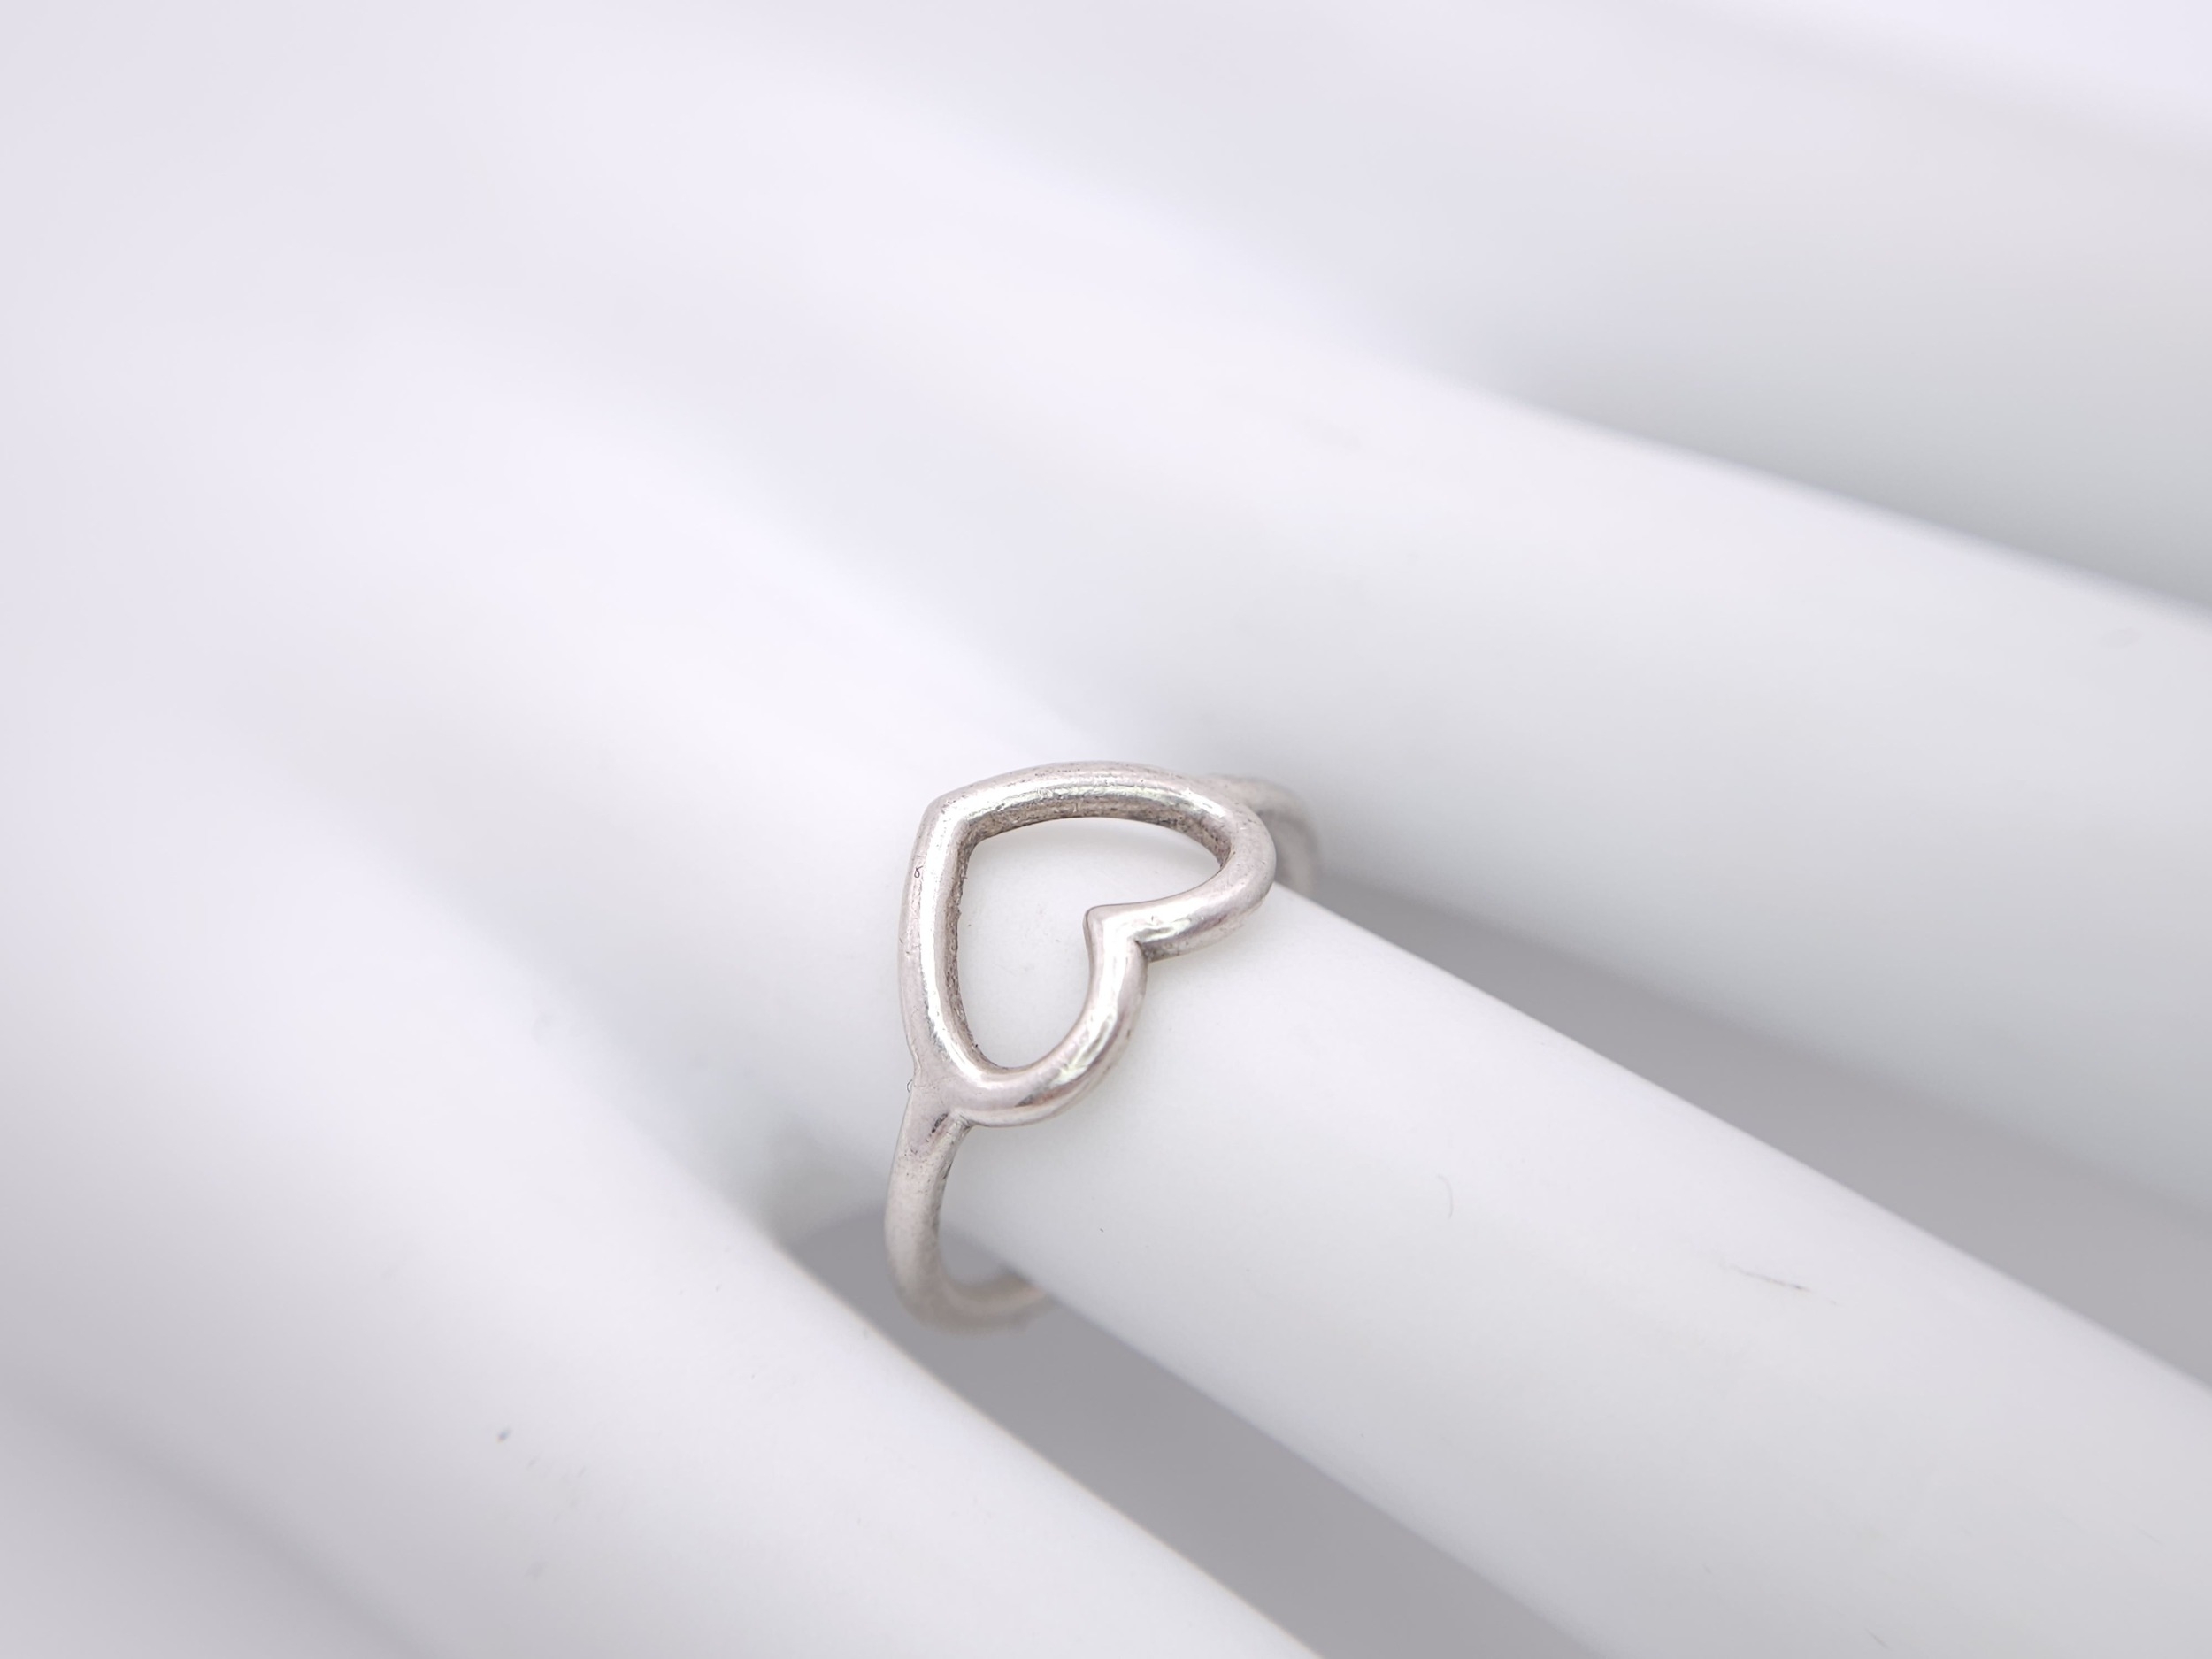 A PANDORA STERLING SILVER HEART RING. UK size N, US size 54, 2g weight. Ref: SC 8087 - Image 7 of 7